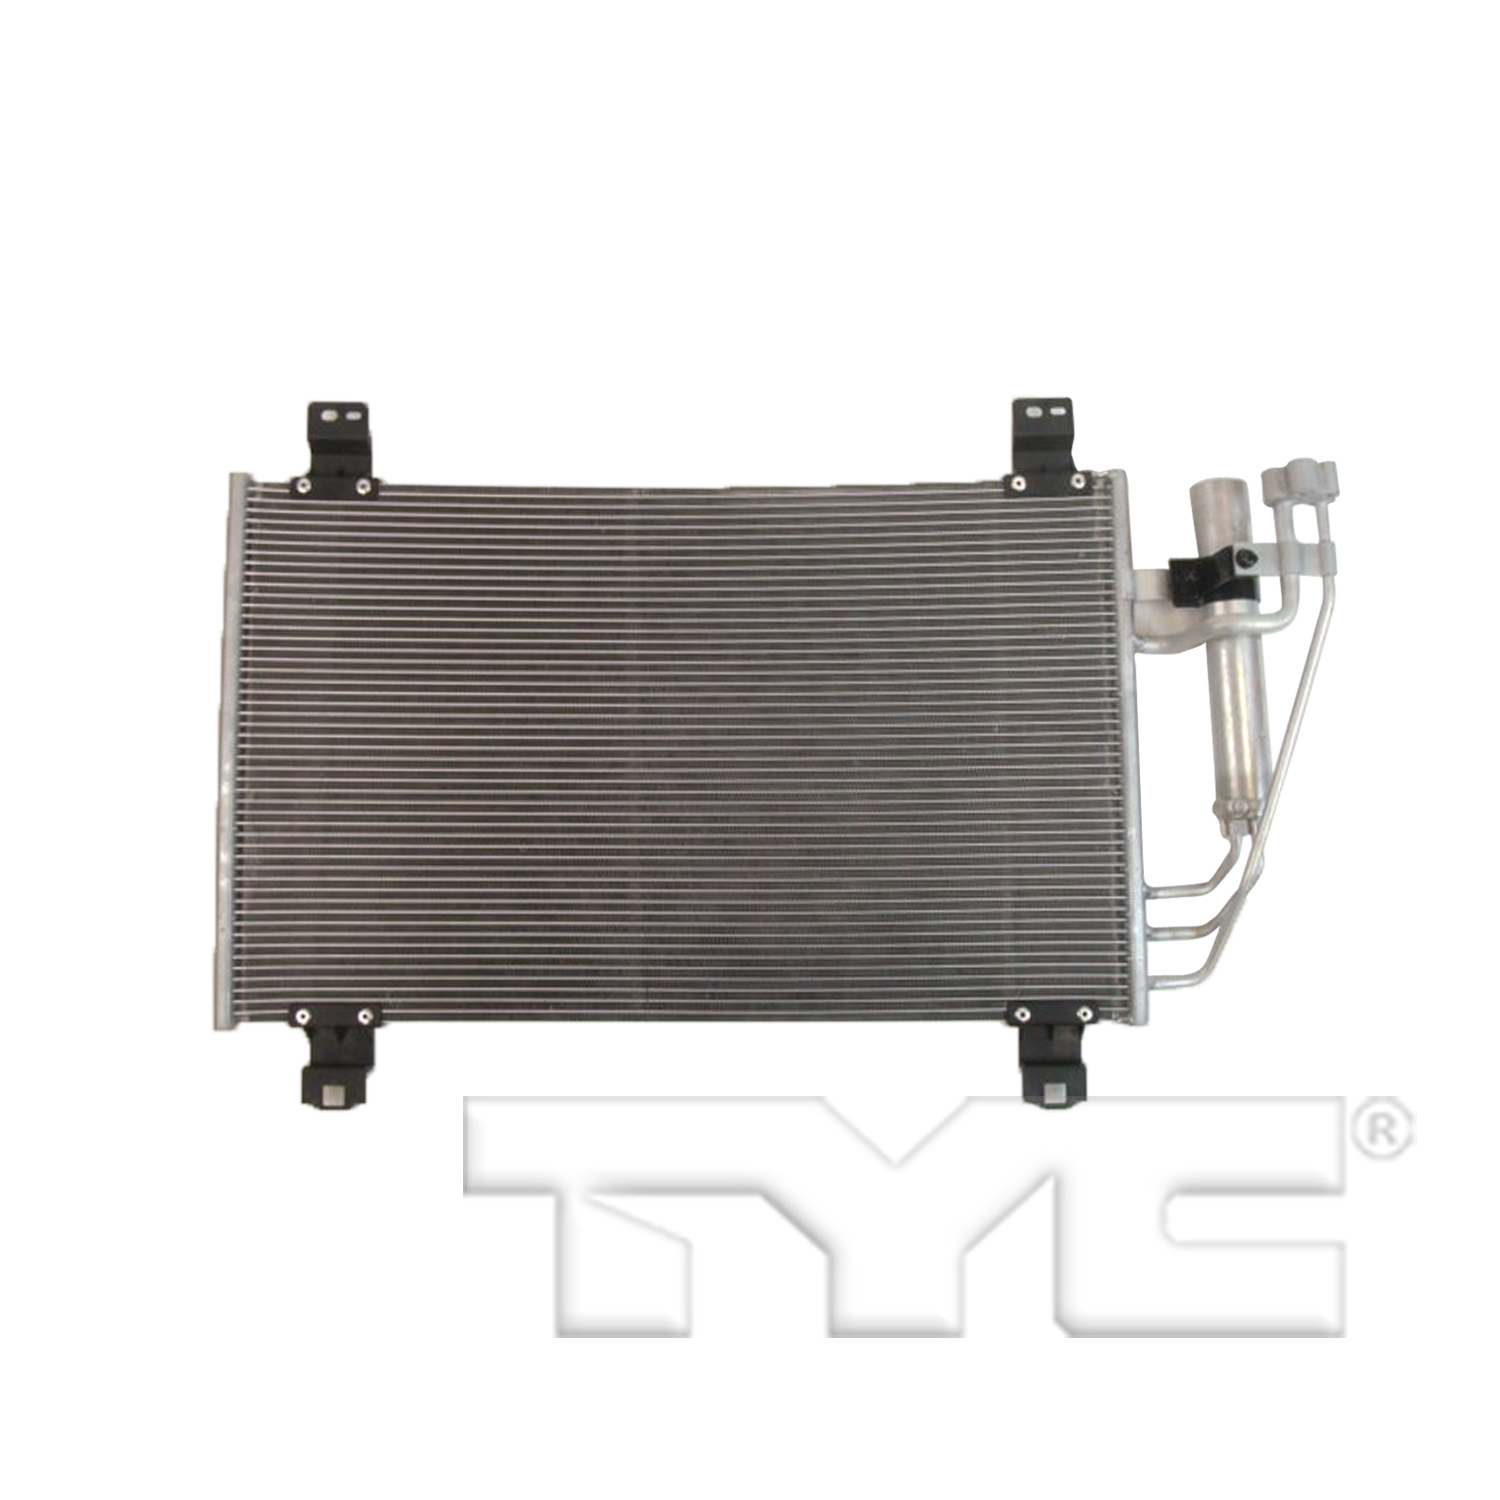 Aftermarket AC CONDENSERS for SCION - IA, iA,16-16,Air conditioning condenser